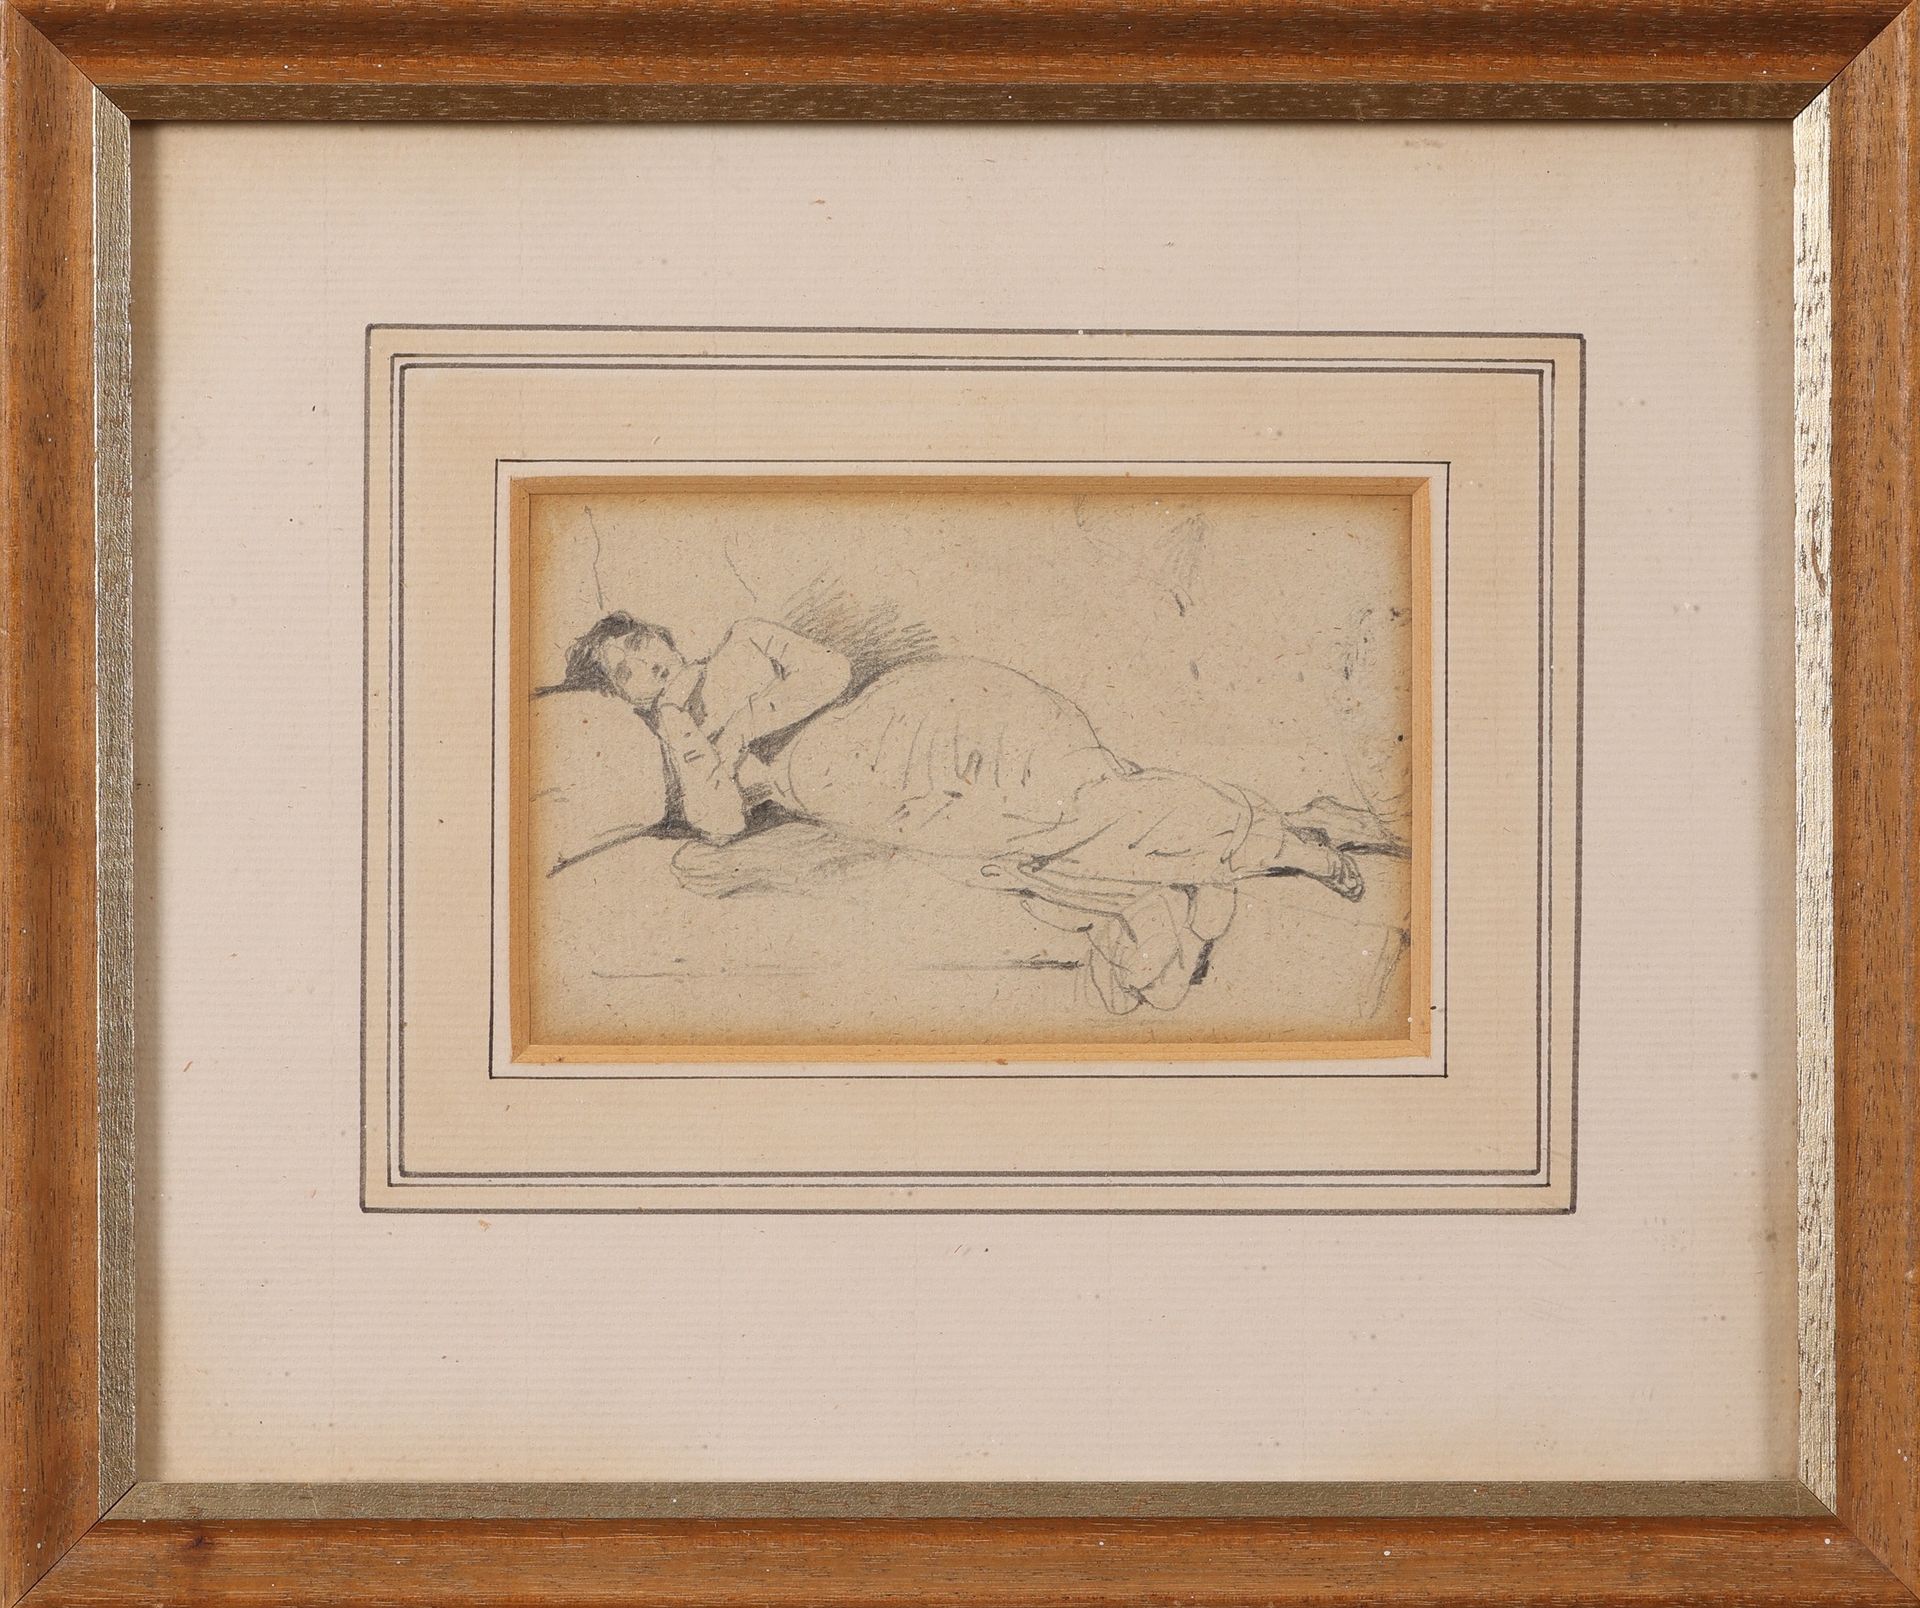 Circle of Manet (1832-1883), A Sleeping Woman, Black Pencil on Paper 马奈（1832-188&hellip;